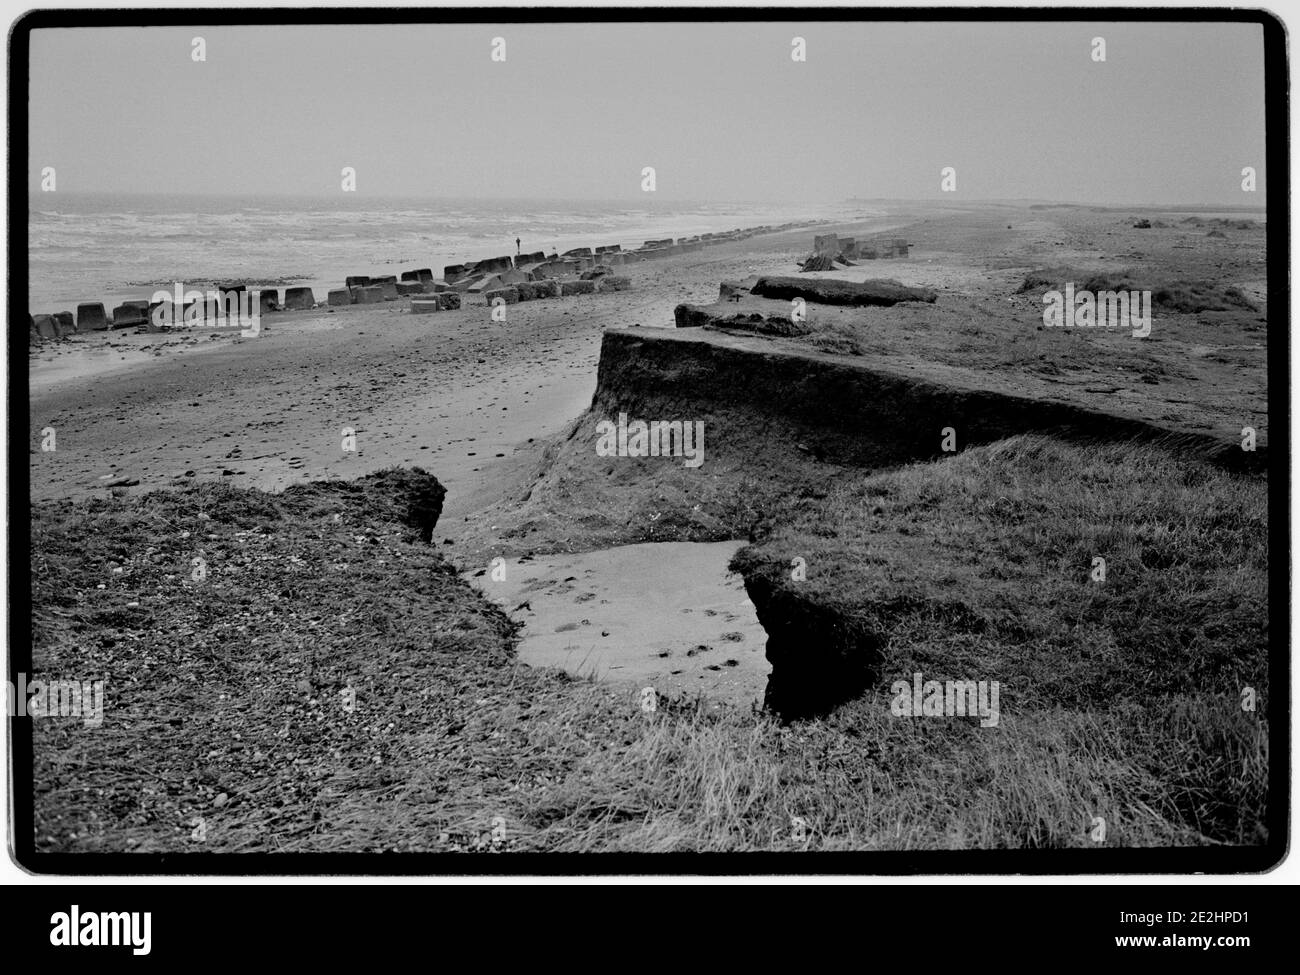 Coastal Erosion Humberside England UK 1994 The disappearing coastline between Skipsea and Easington on Humberside. which is being washed away at 1.7 metres a year since records began in the mid 1950’s. Stock Photo